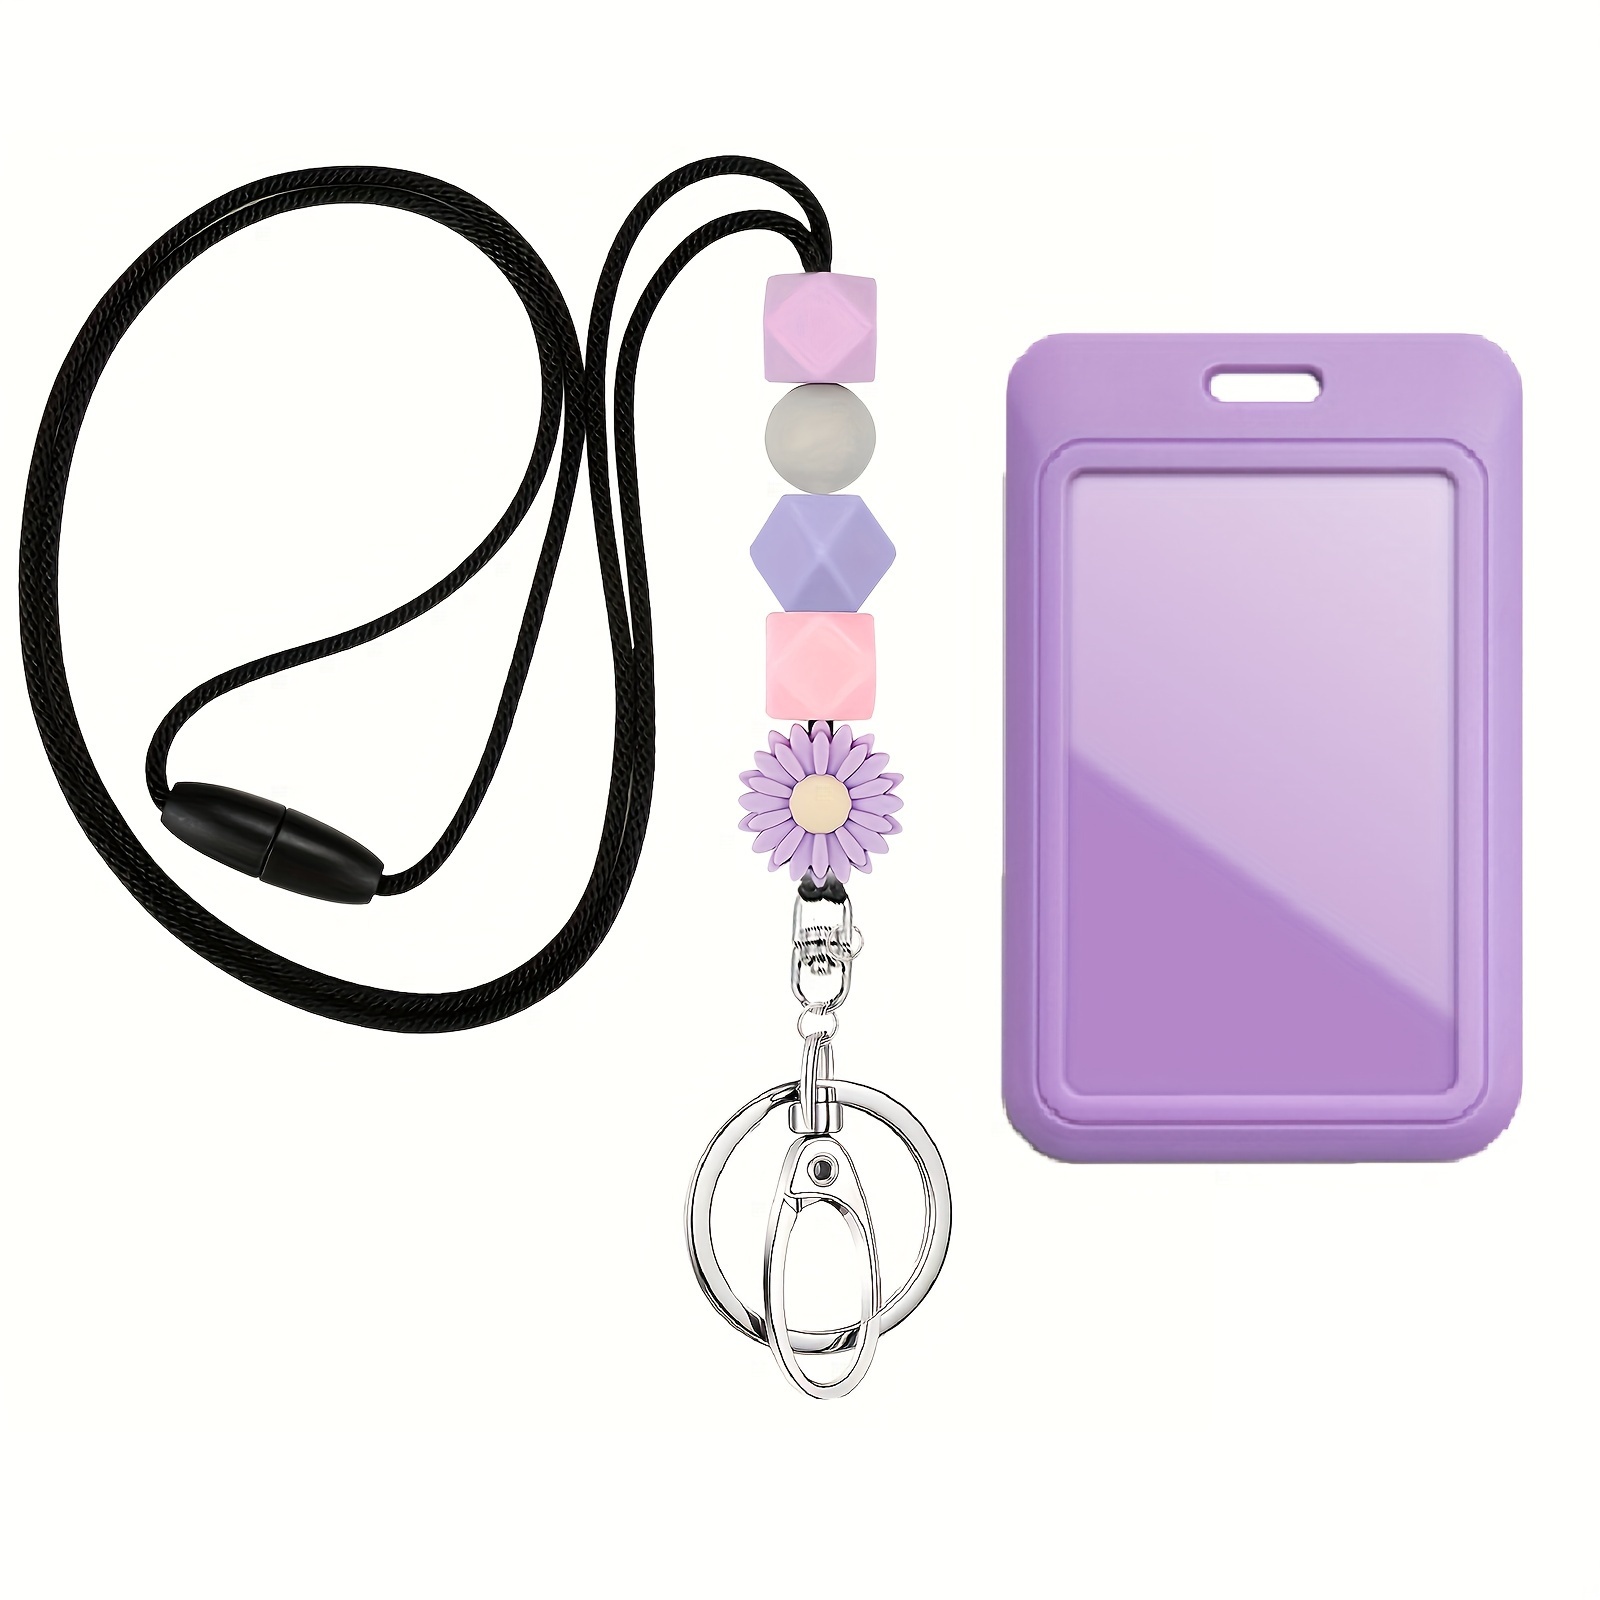 2Pcs/Set Cute Daisy Flower Silicone Beaded ID Badge Holder with Lanyard, Name Tag Holder with Clip, Detachable Lanyard Necklace for Teacher Nurse